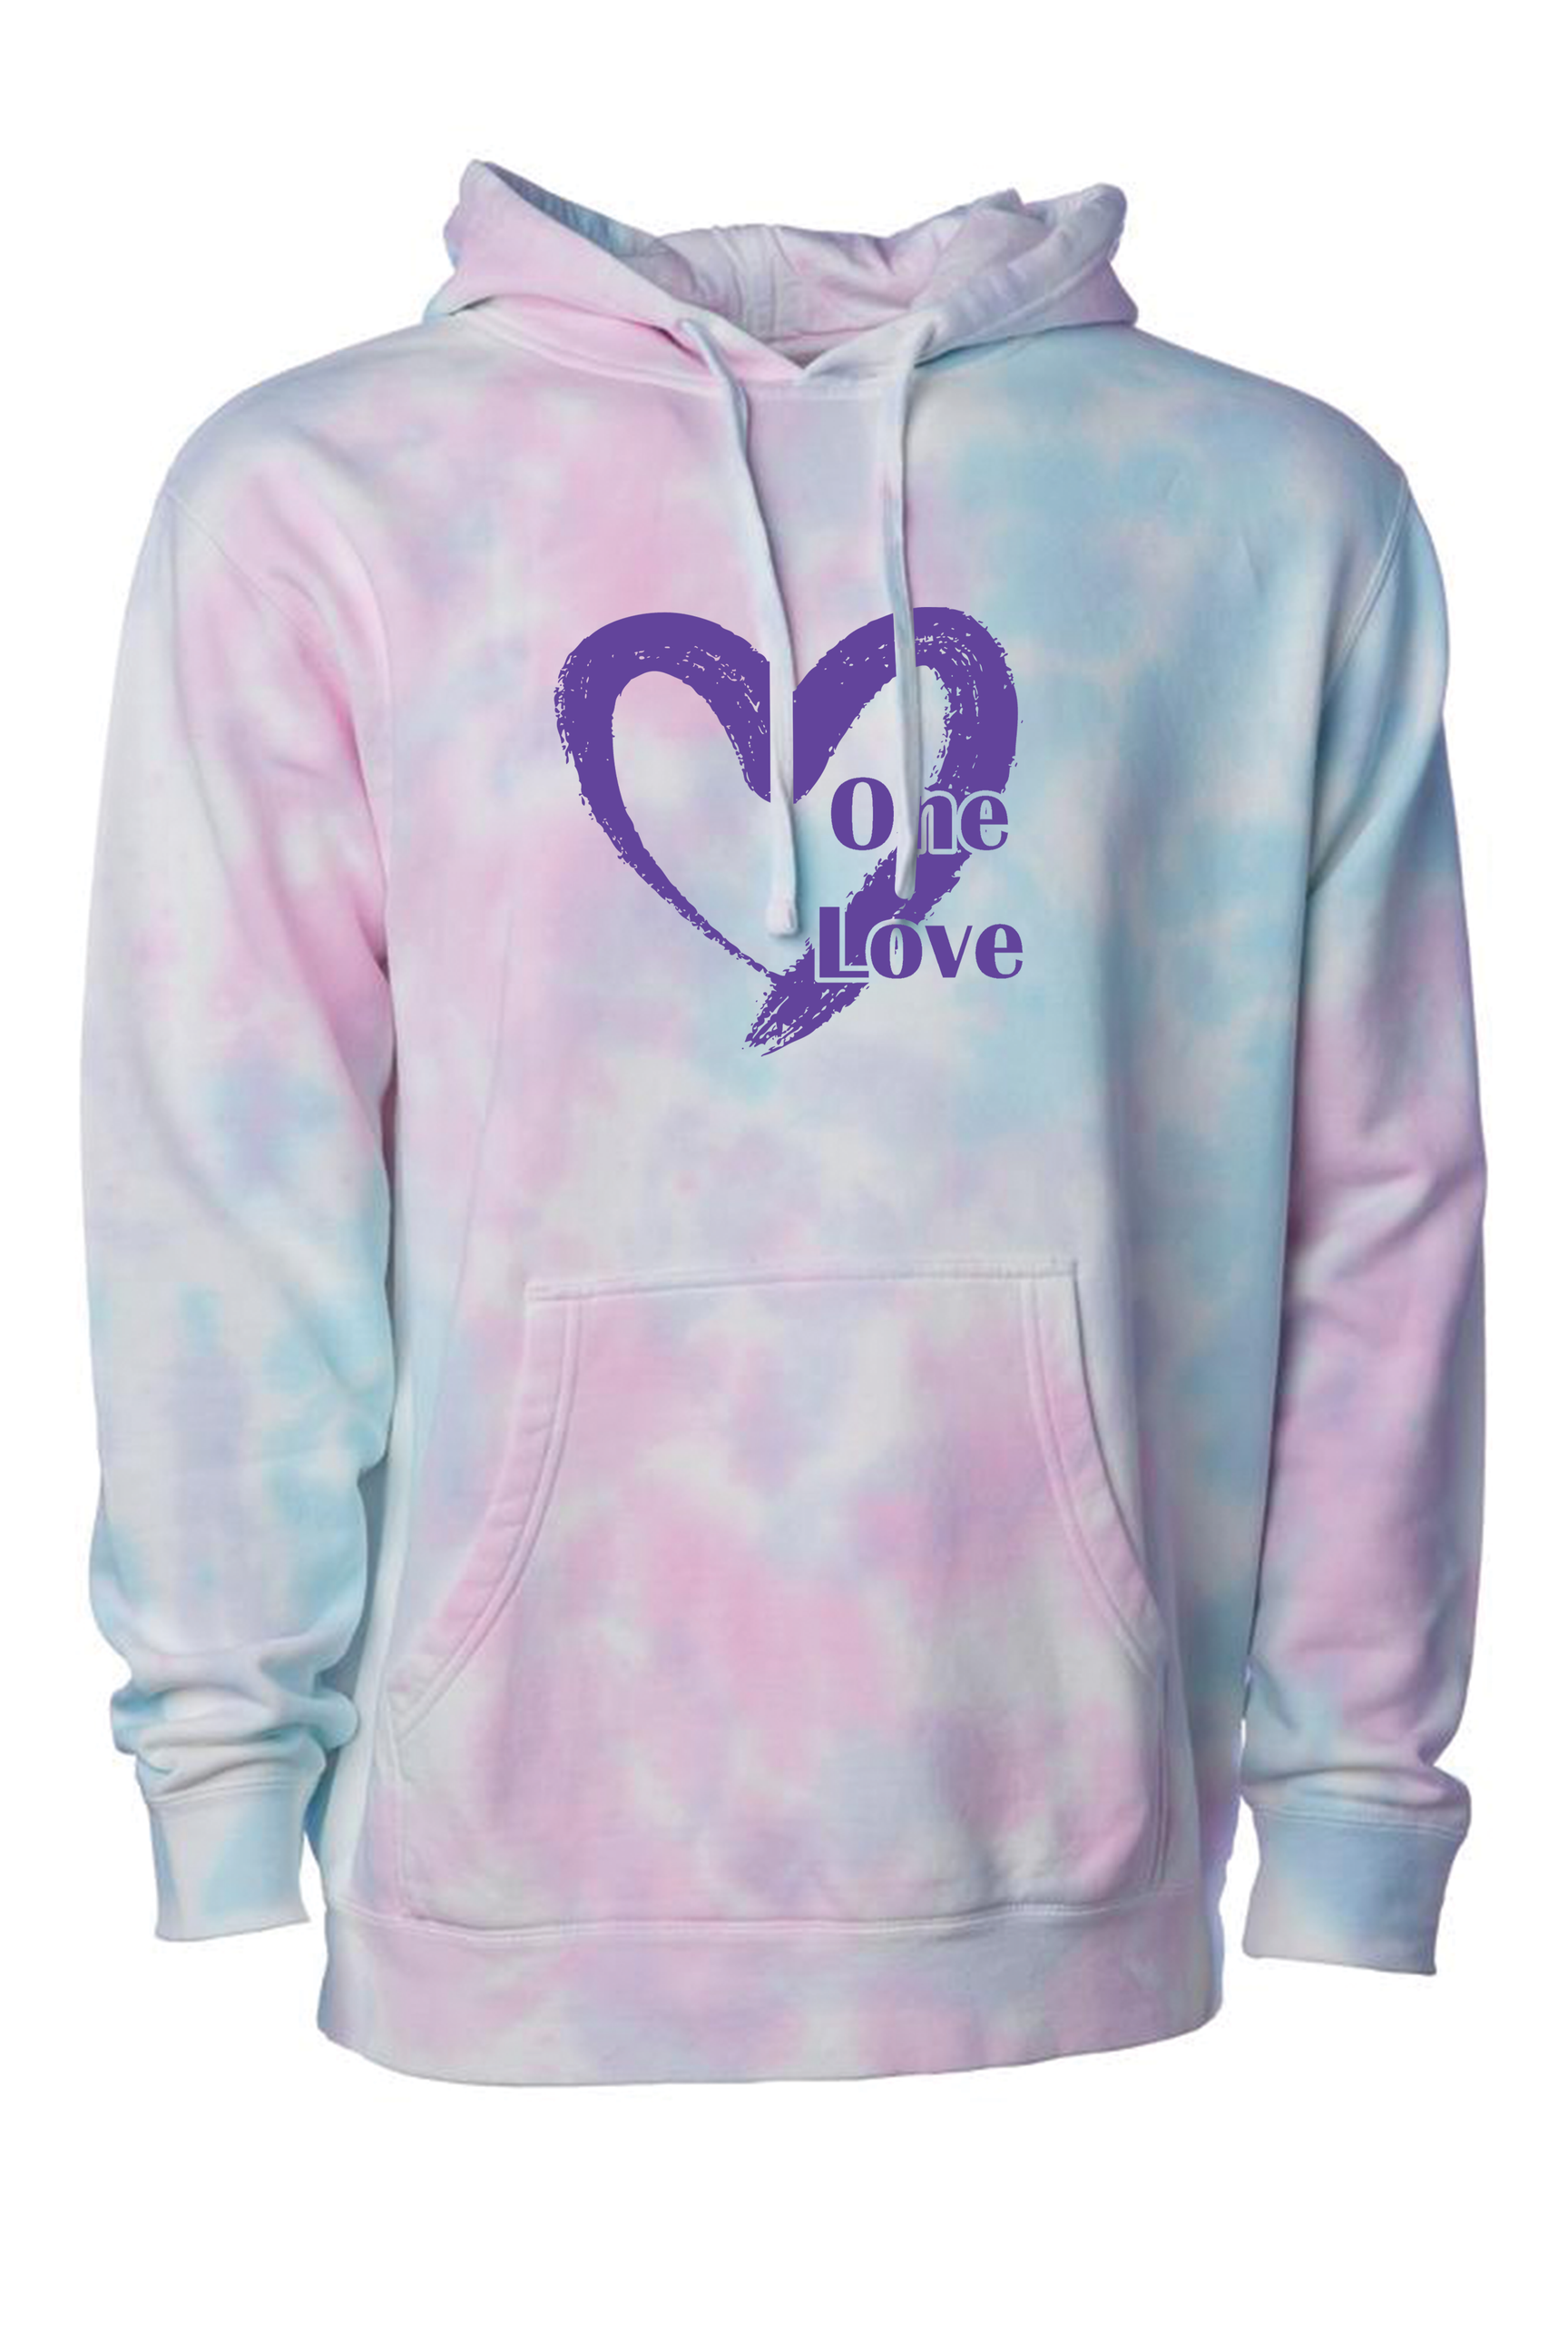 One Love Hoodie – XXV the Label